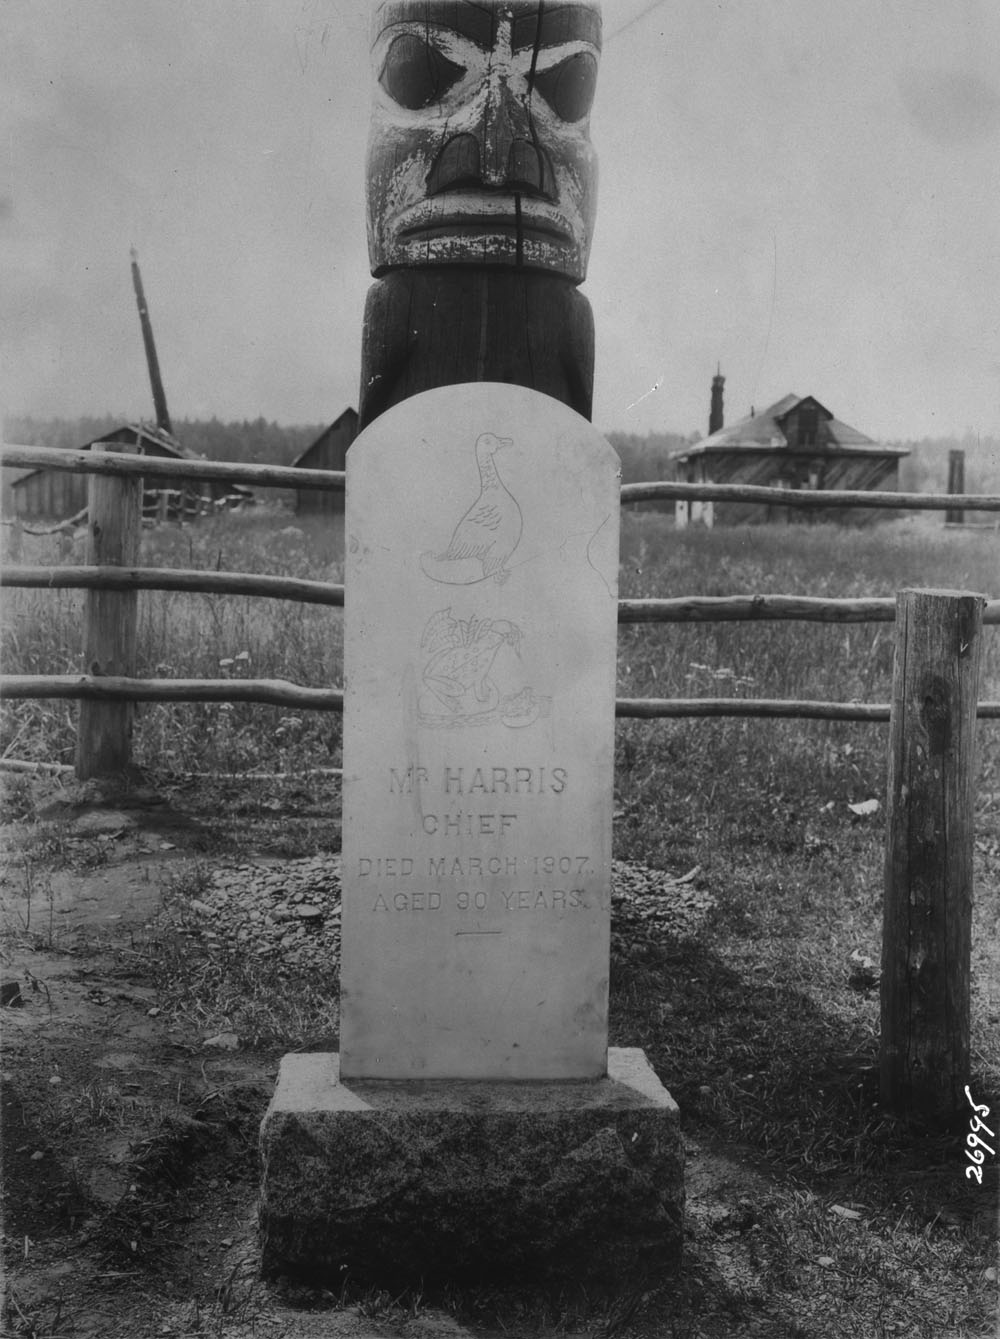 A tombstone in front of a totem pole. It says "Mr Harris Chief. Died March 1907, aged 90 years"